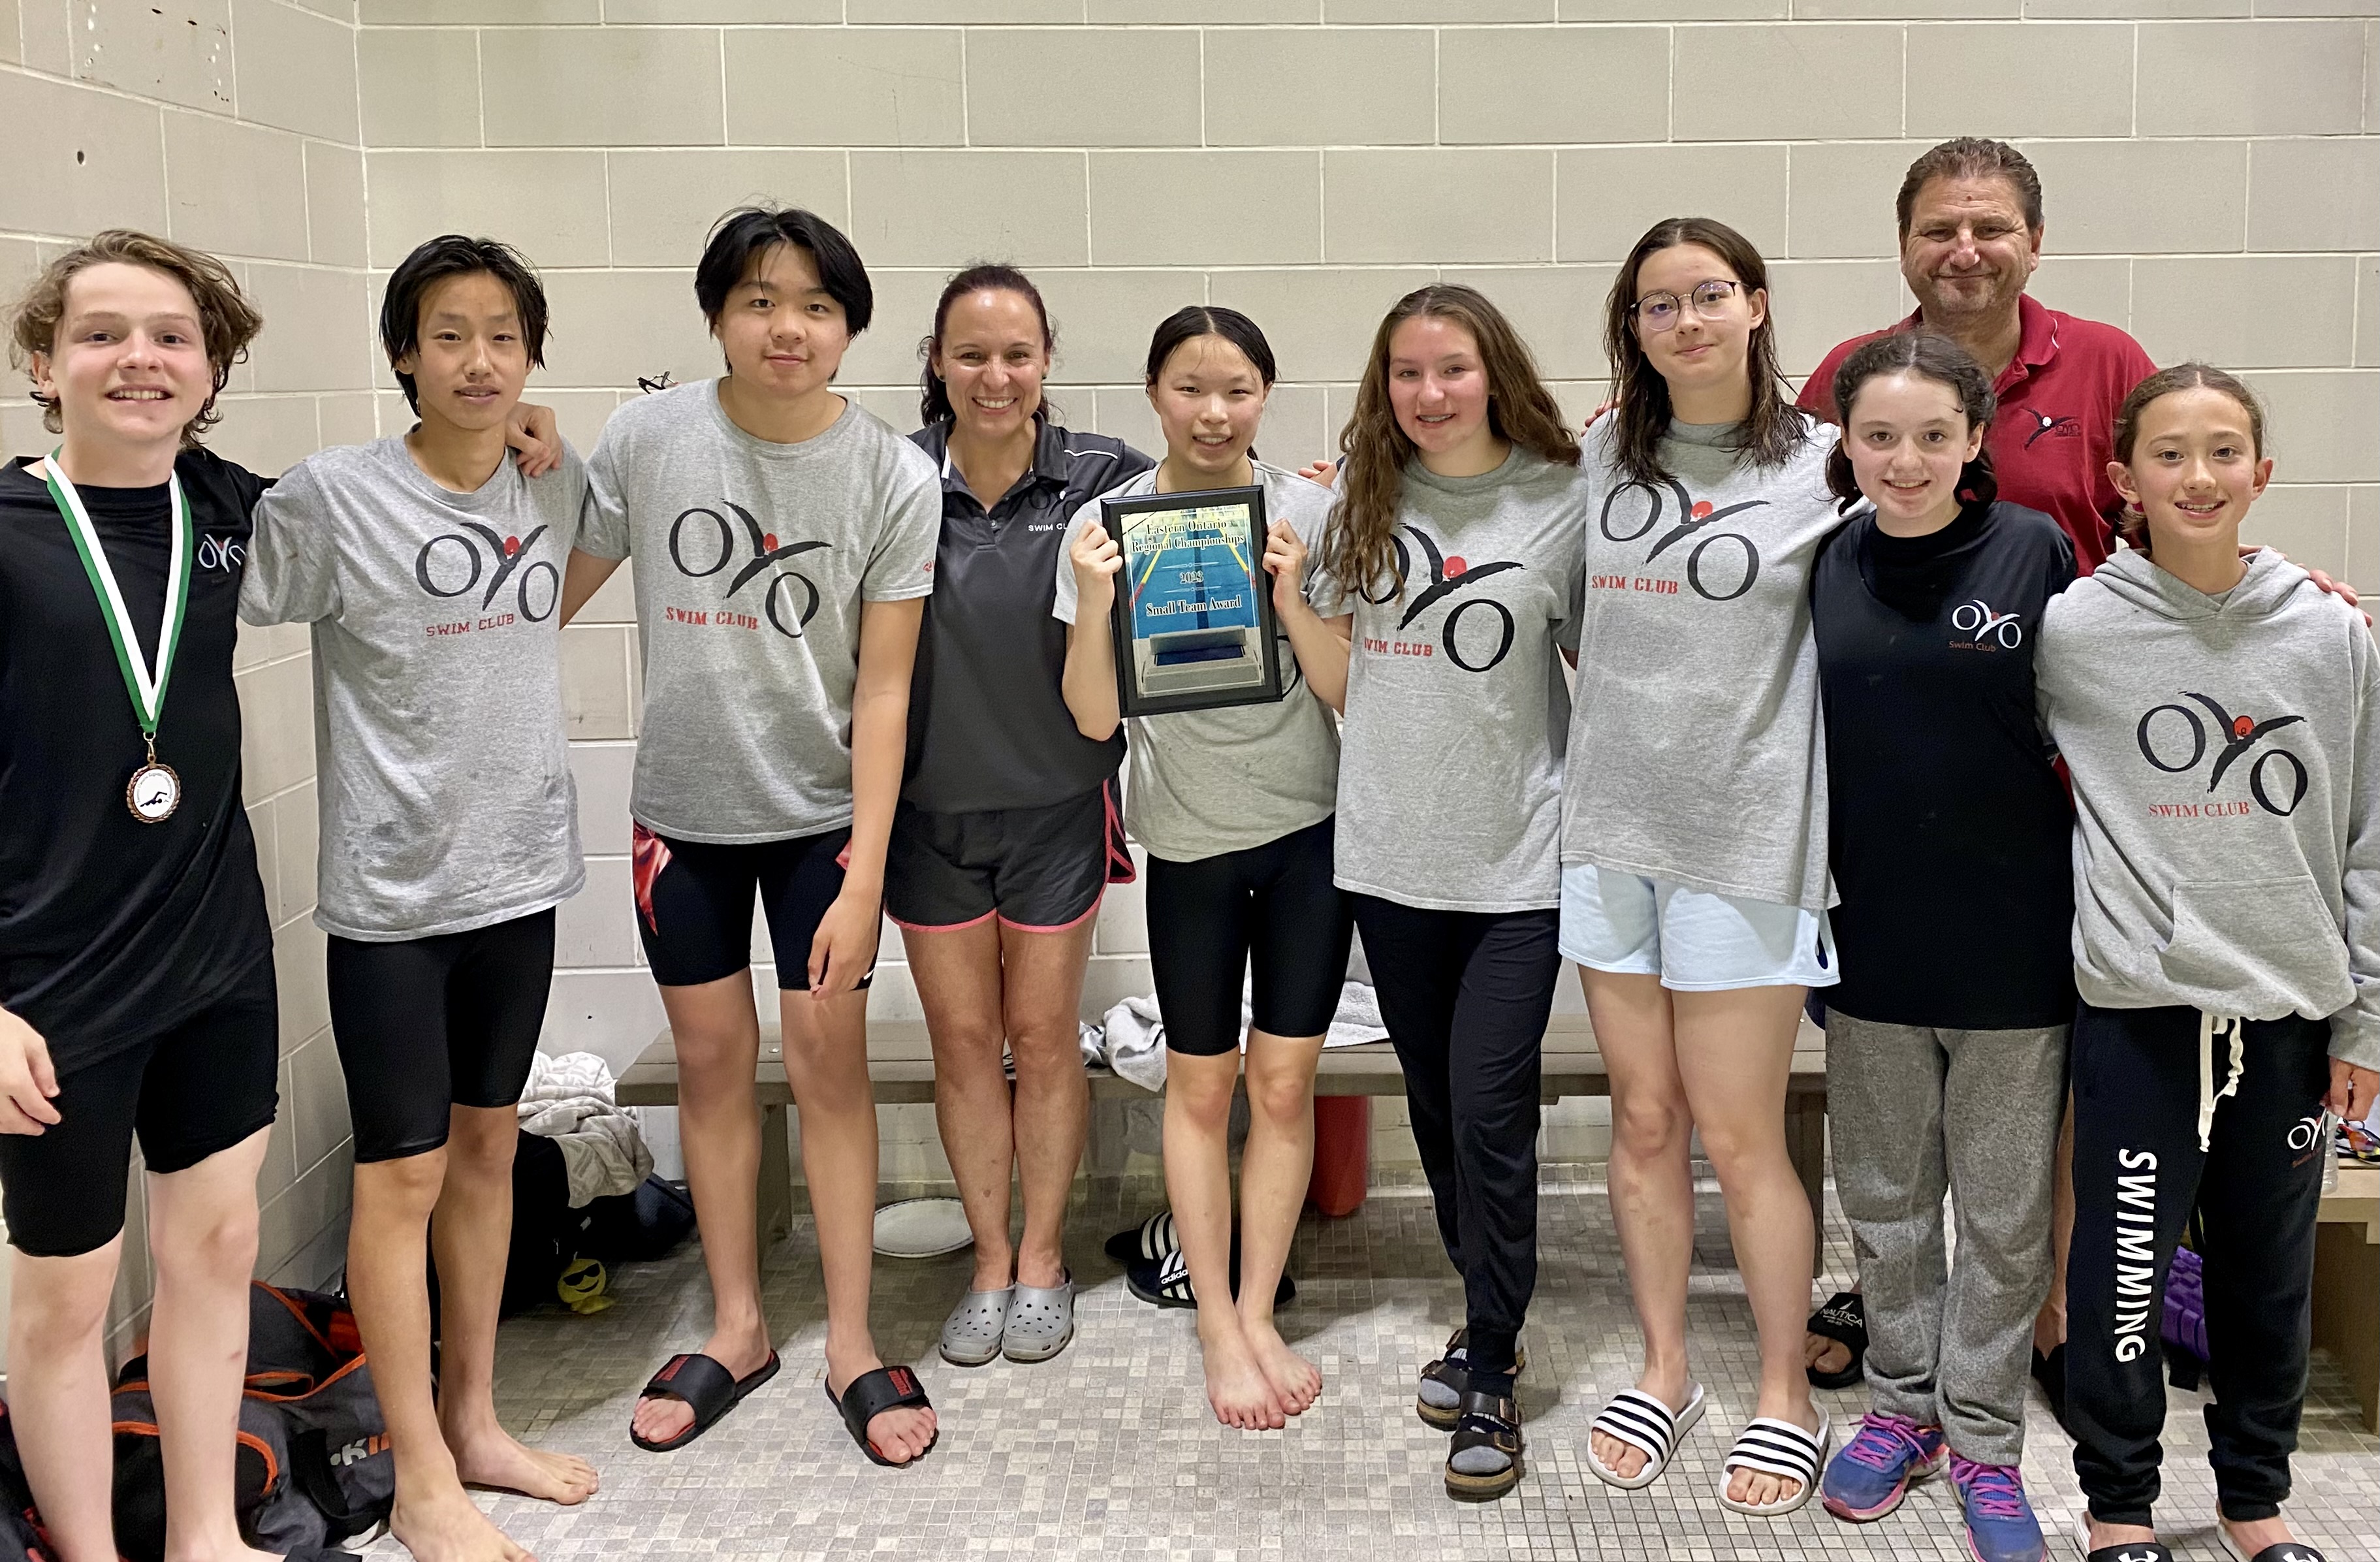 OYO Swim Club, The best small team in the area!